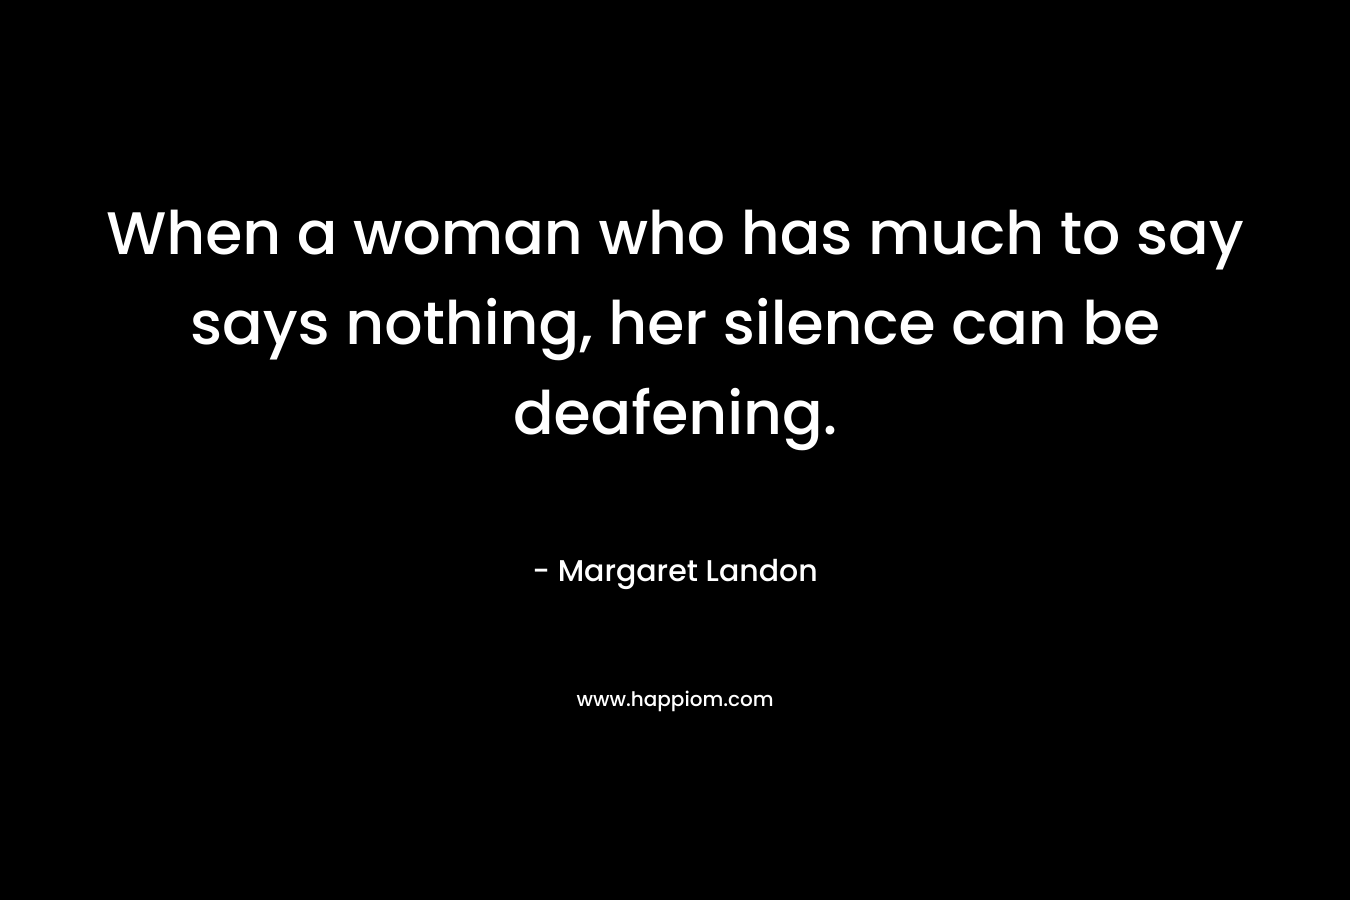 When a woman who has much to say says nothing, her silence can be deafening. – Margaret Landon